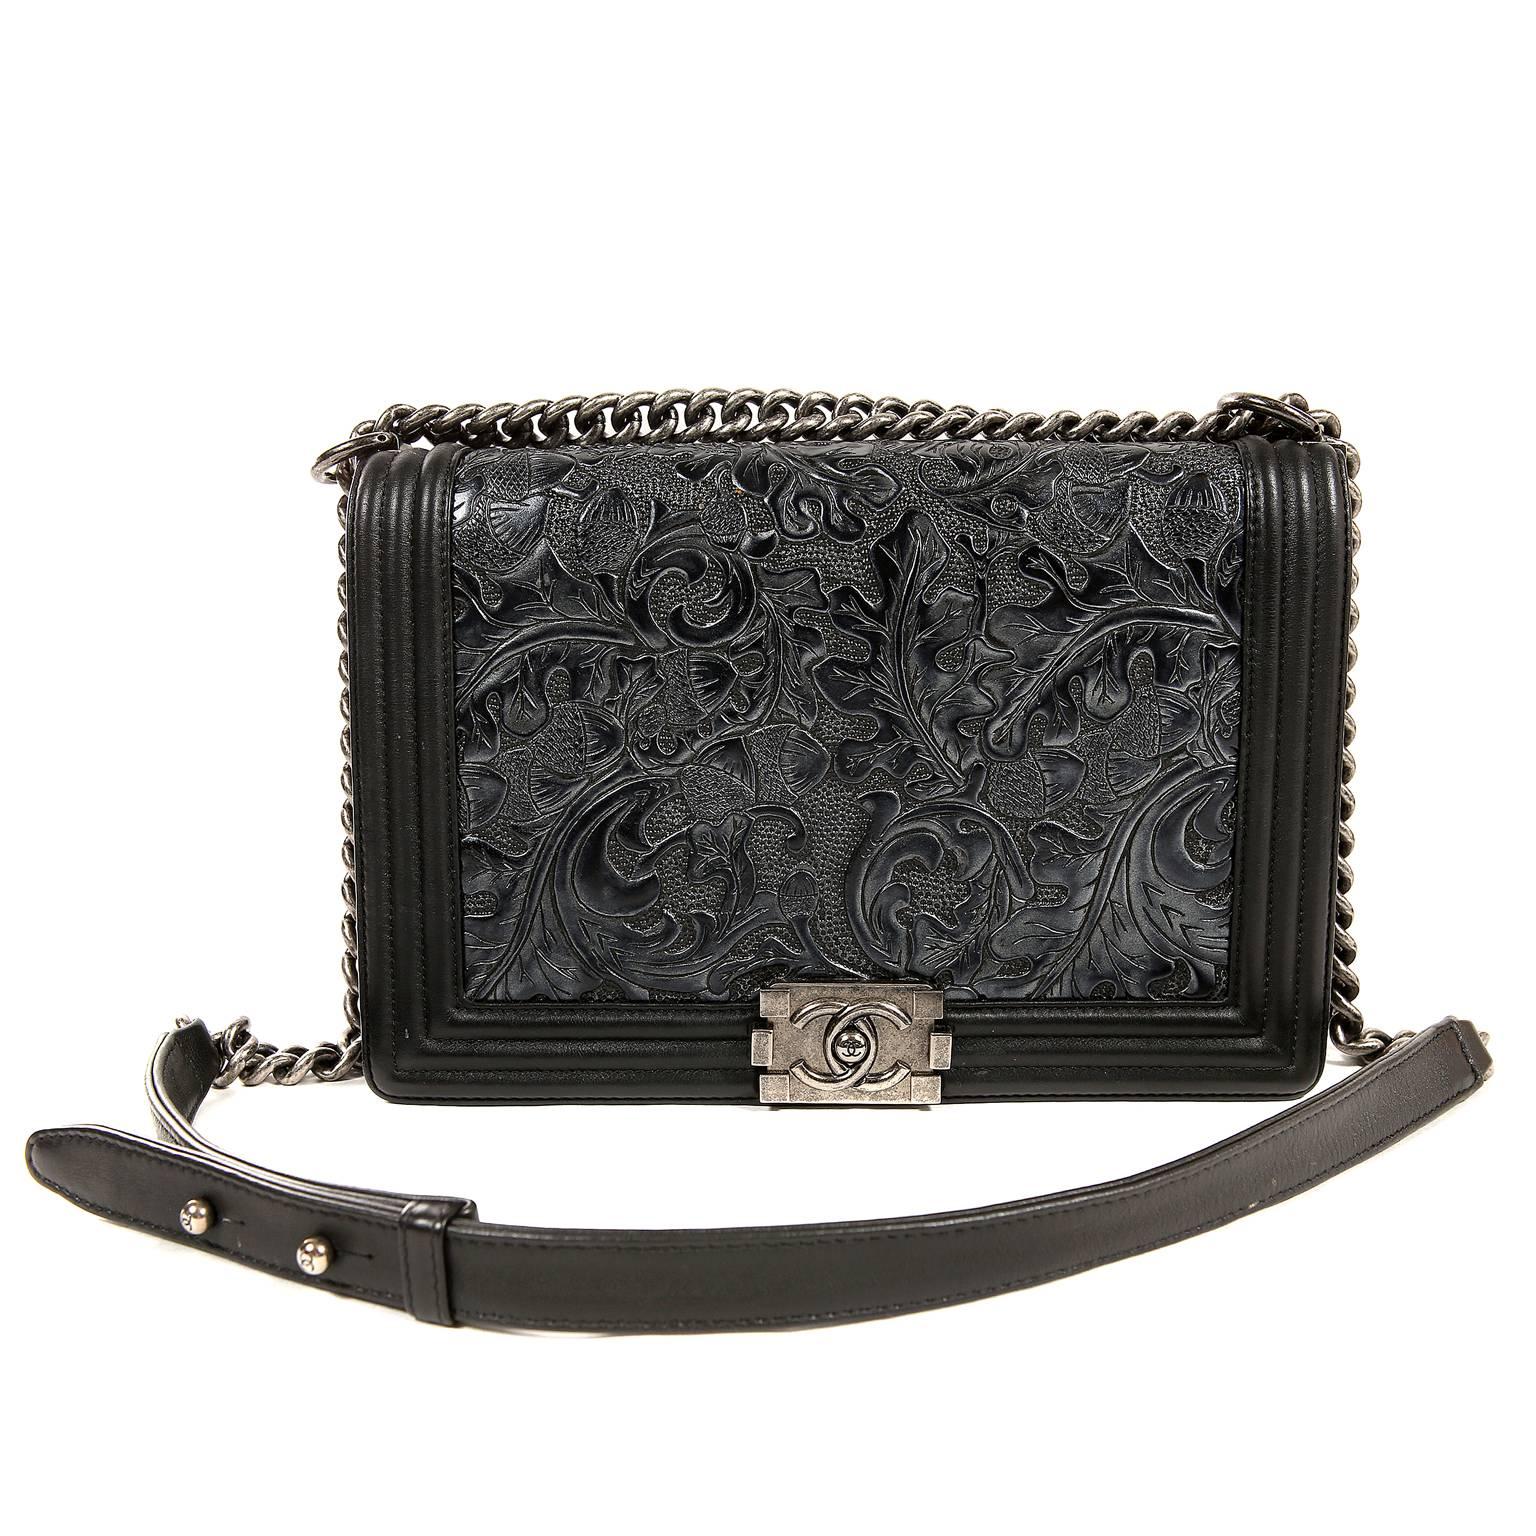 Chanel Black Tooled Leather Paris Dallas Cordoba Boy Bag- Pristine Condition; appears never carried.
 A rare style from the 2014 collection, the updated Boy Bag receives special treatment with a tooled leather façade and ruthenium hardware